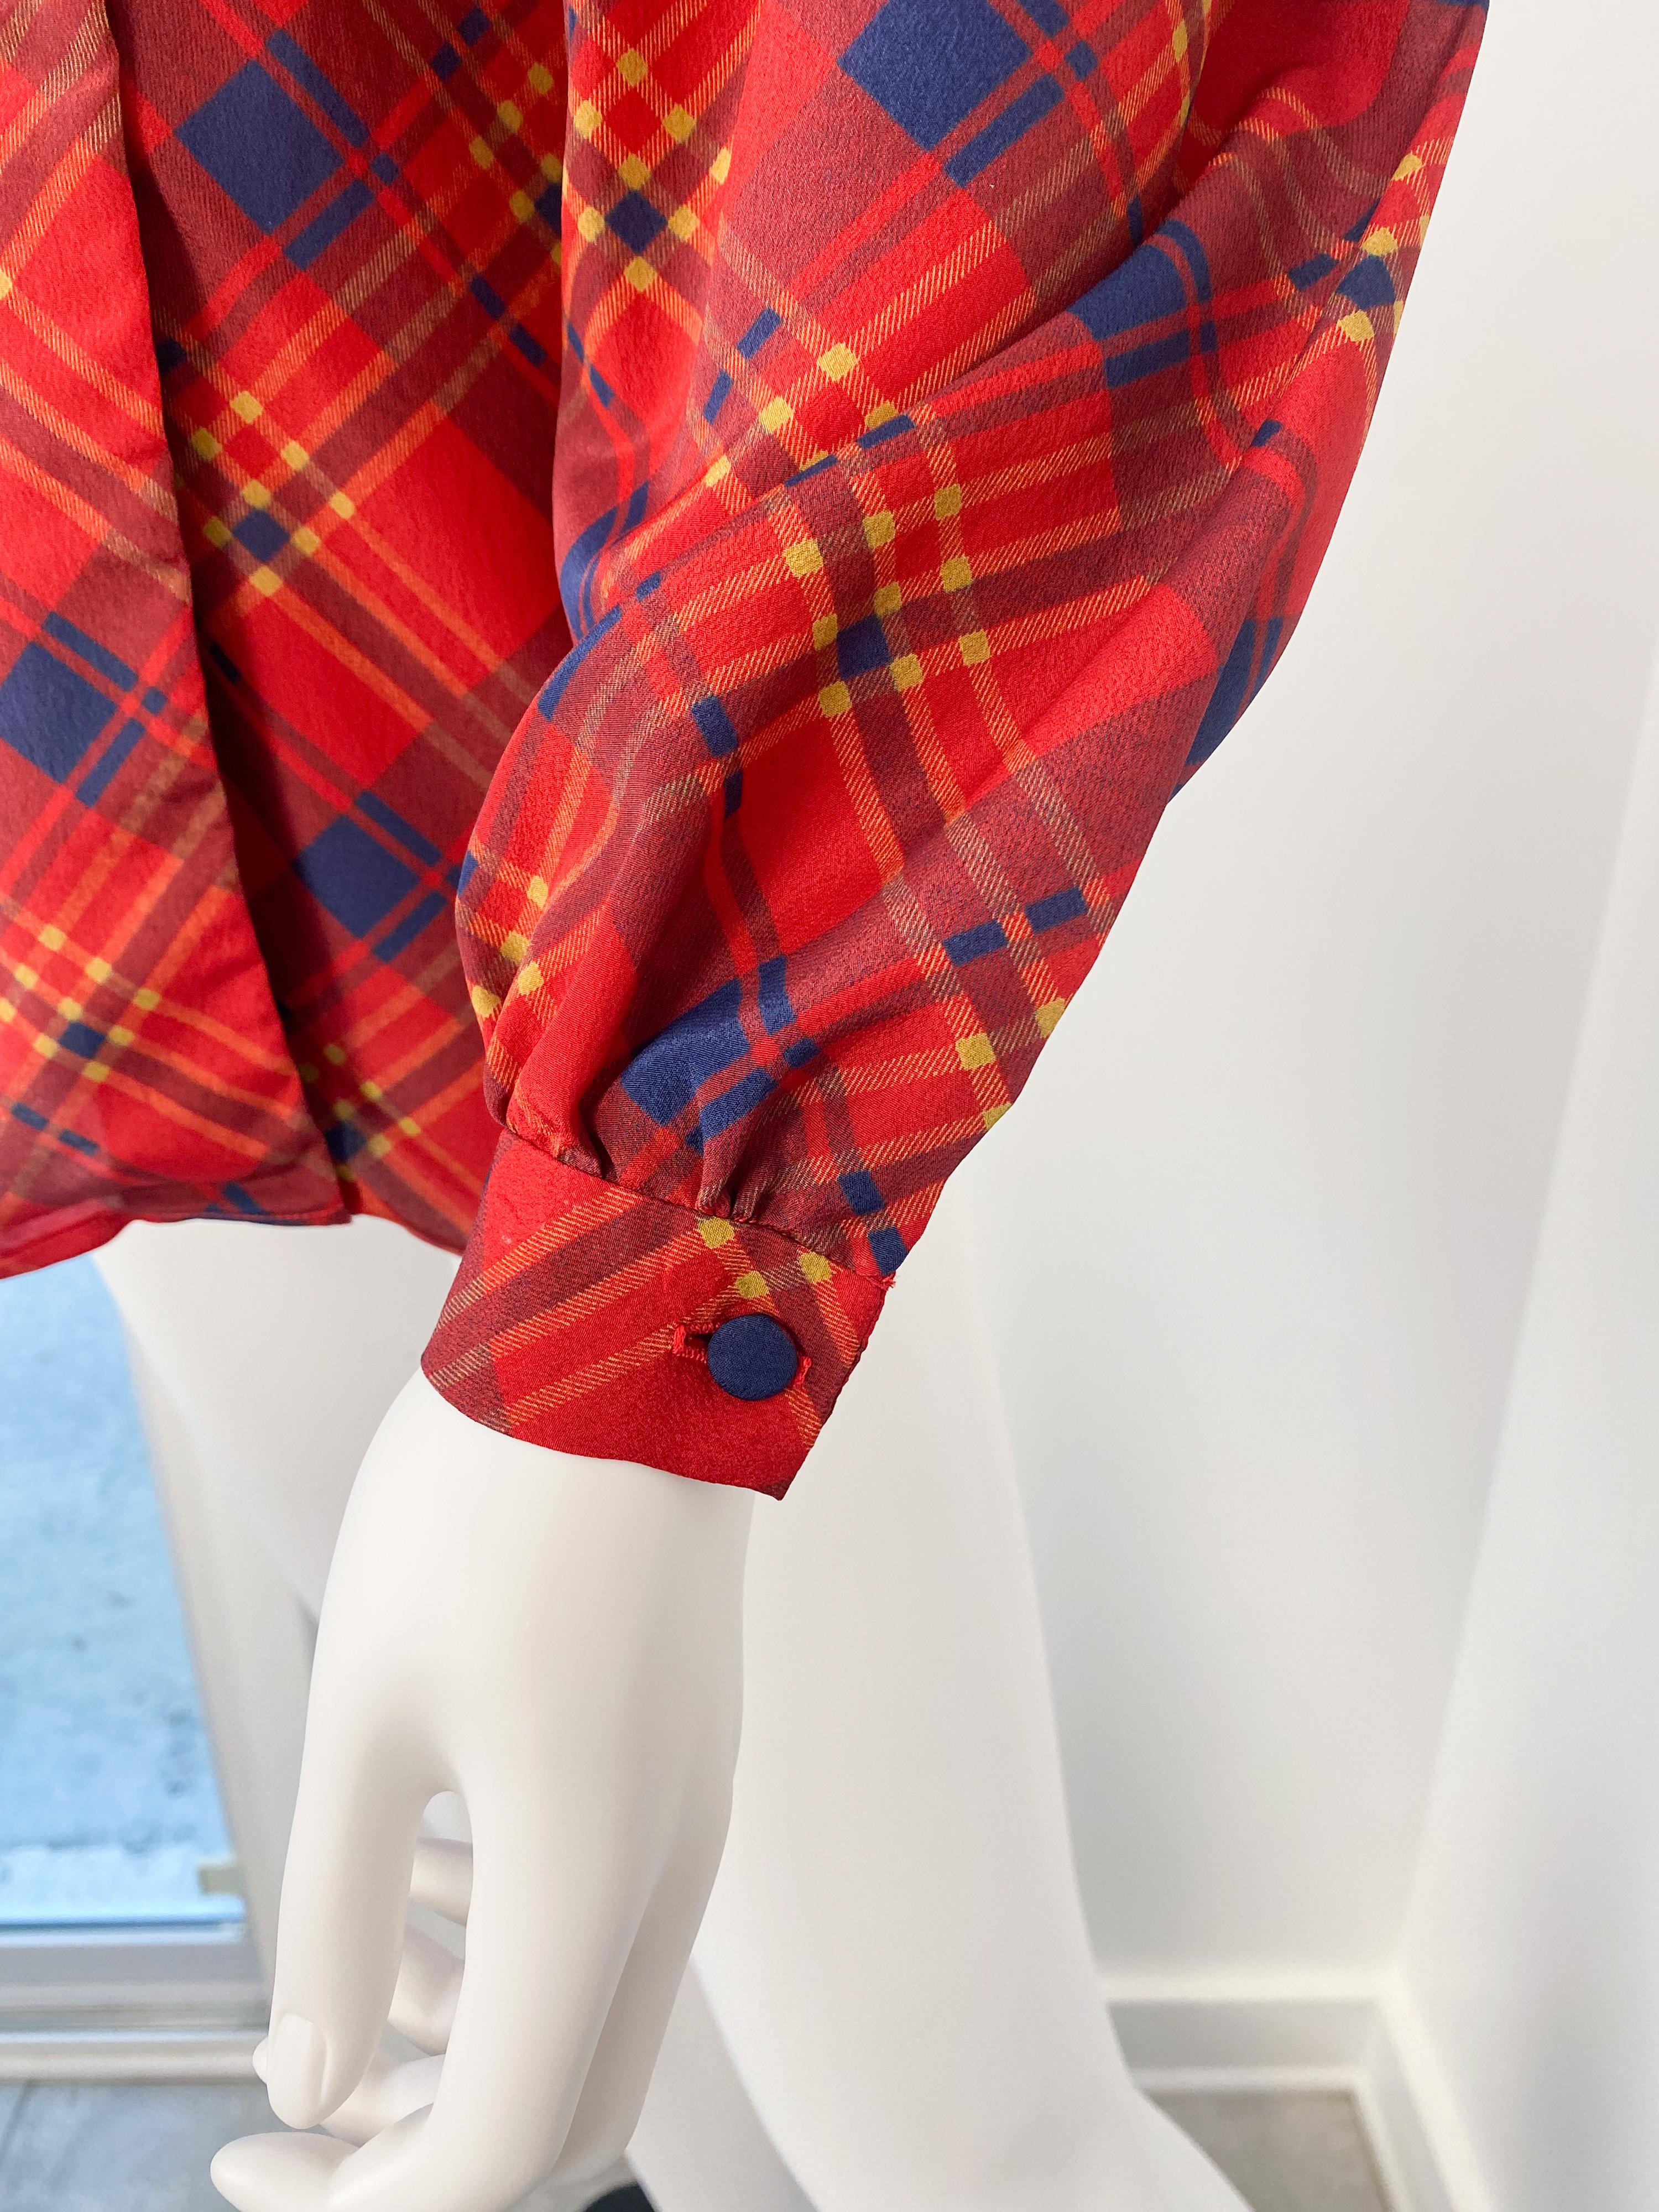 Vintage 1980s Silky Polyester Blouse Top Red and Blue Tartan Size 6/8 For Sale 5